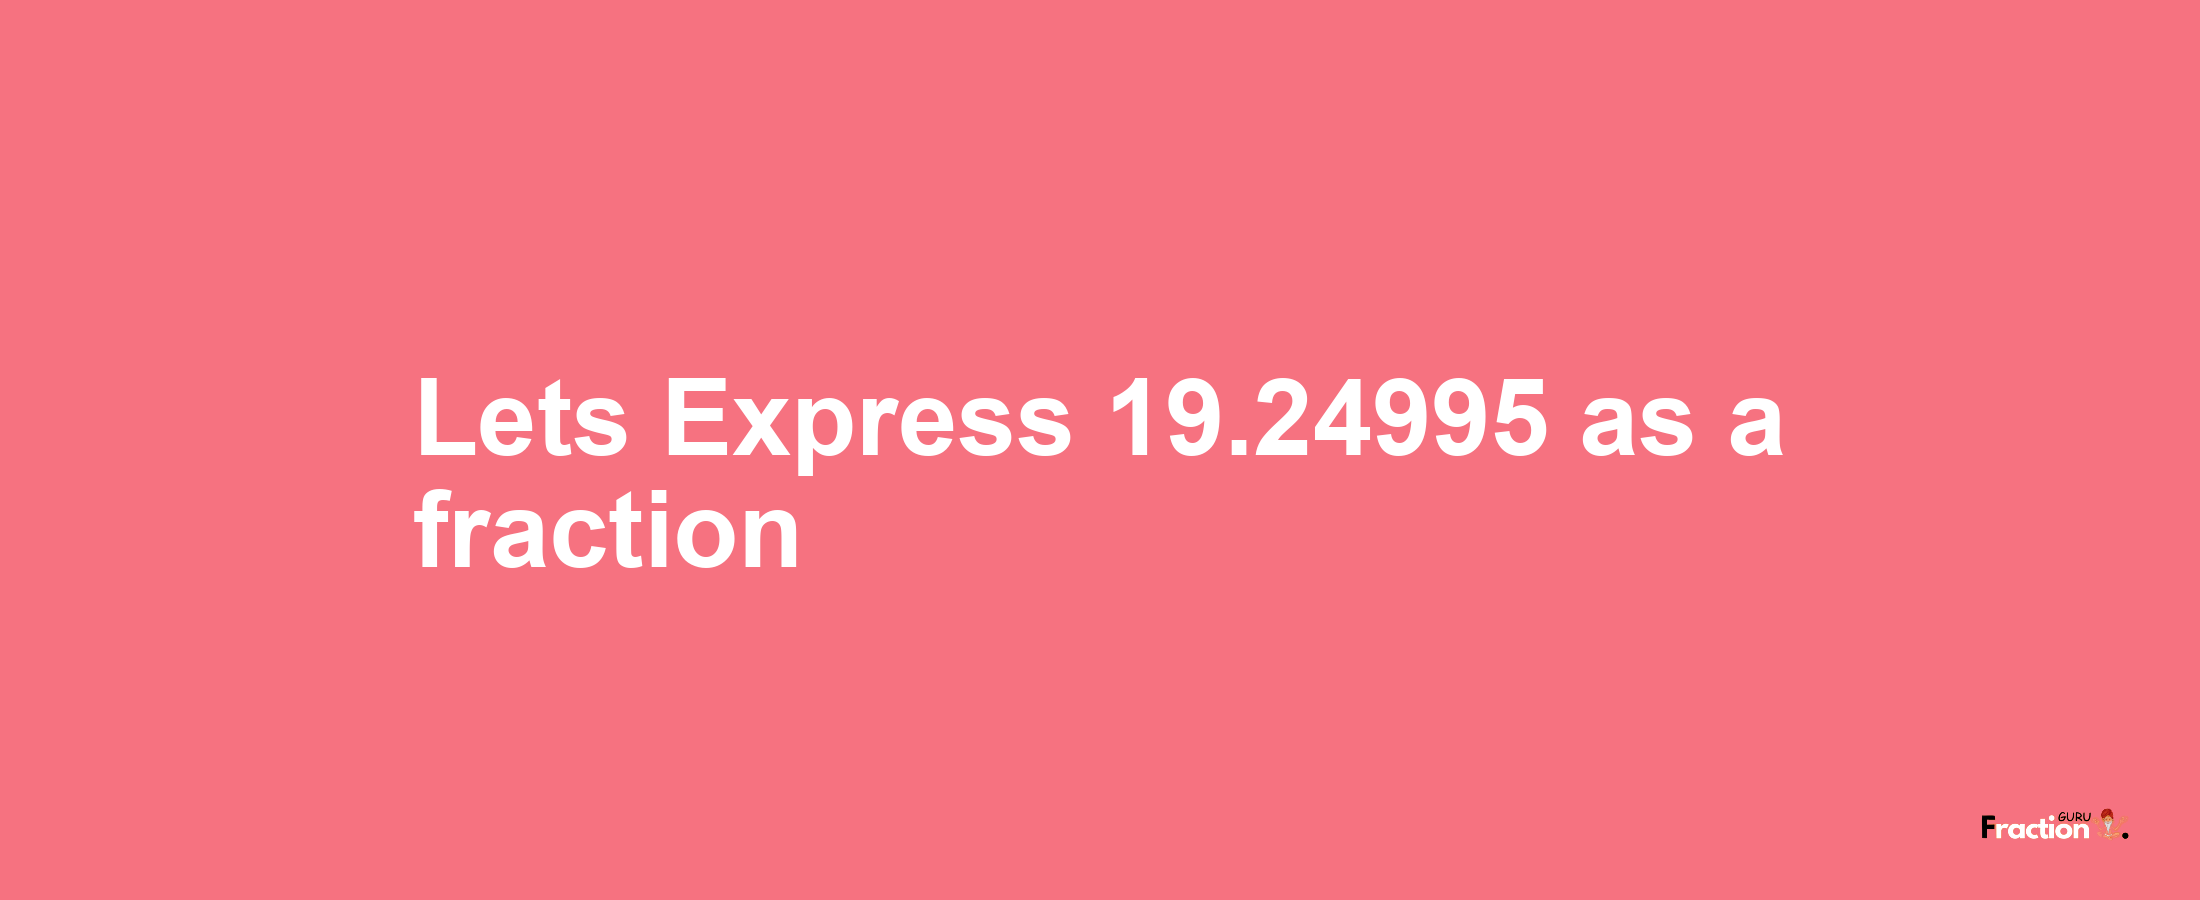 Lets Express 19.24995 as afraction